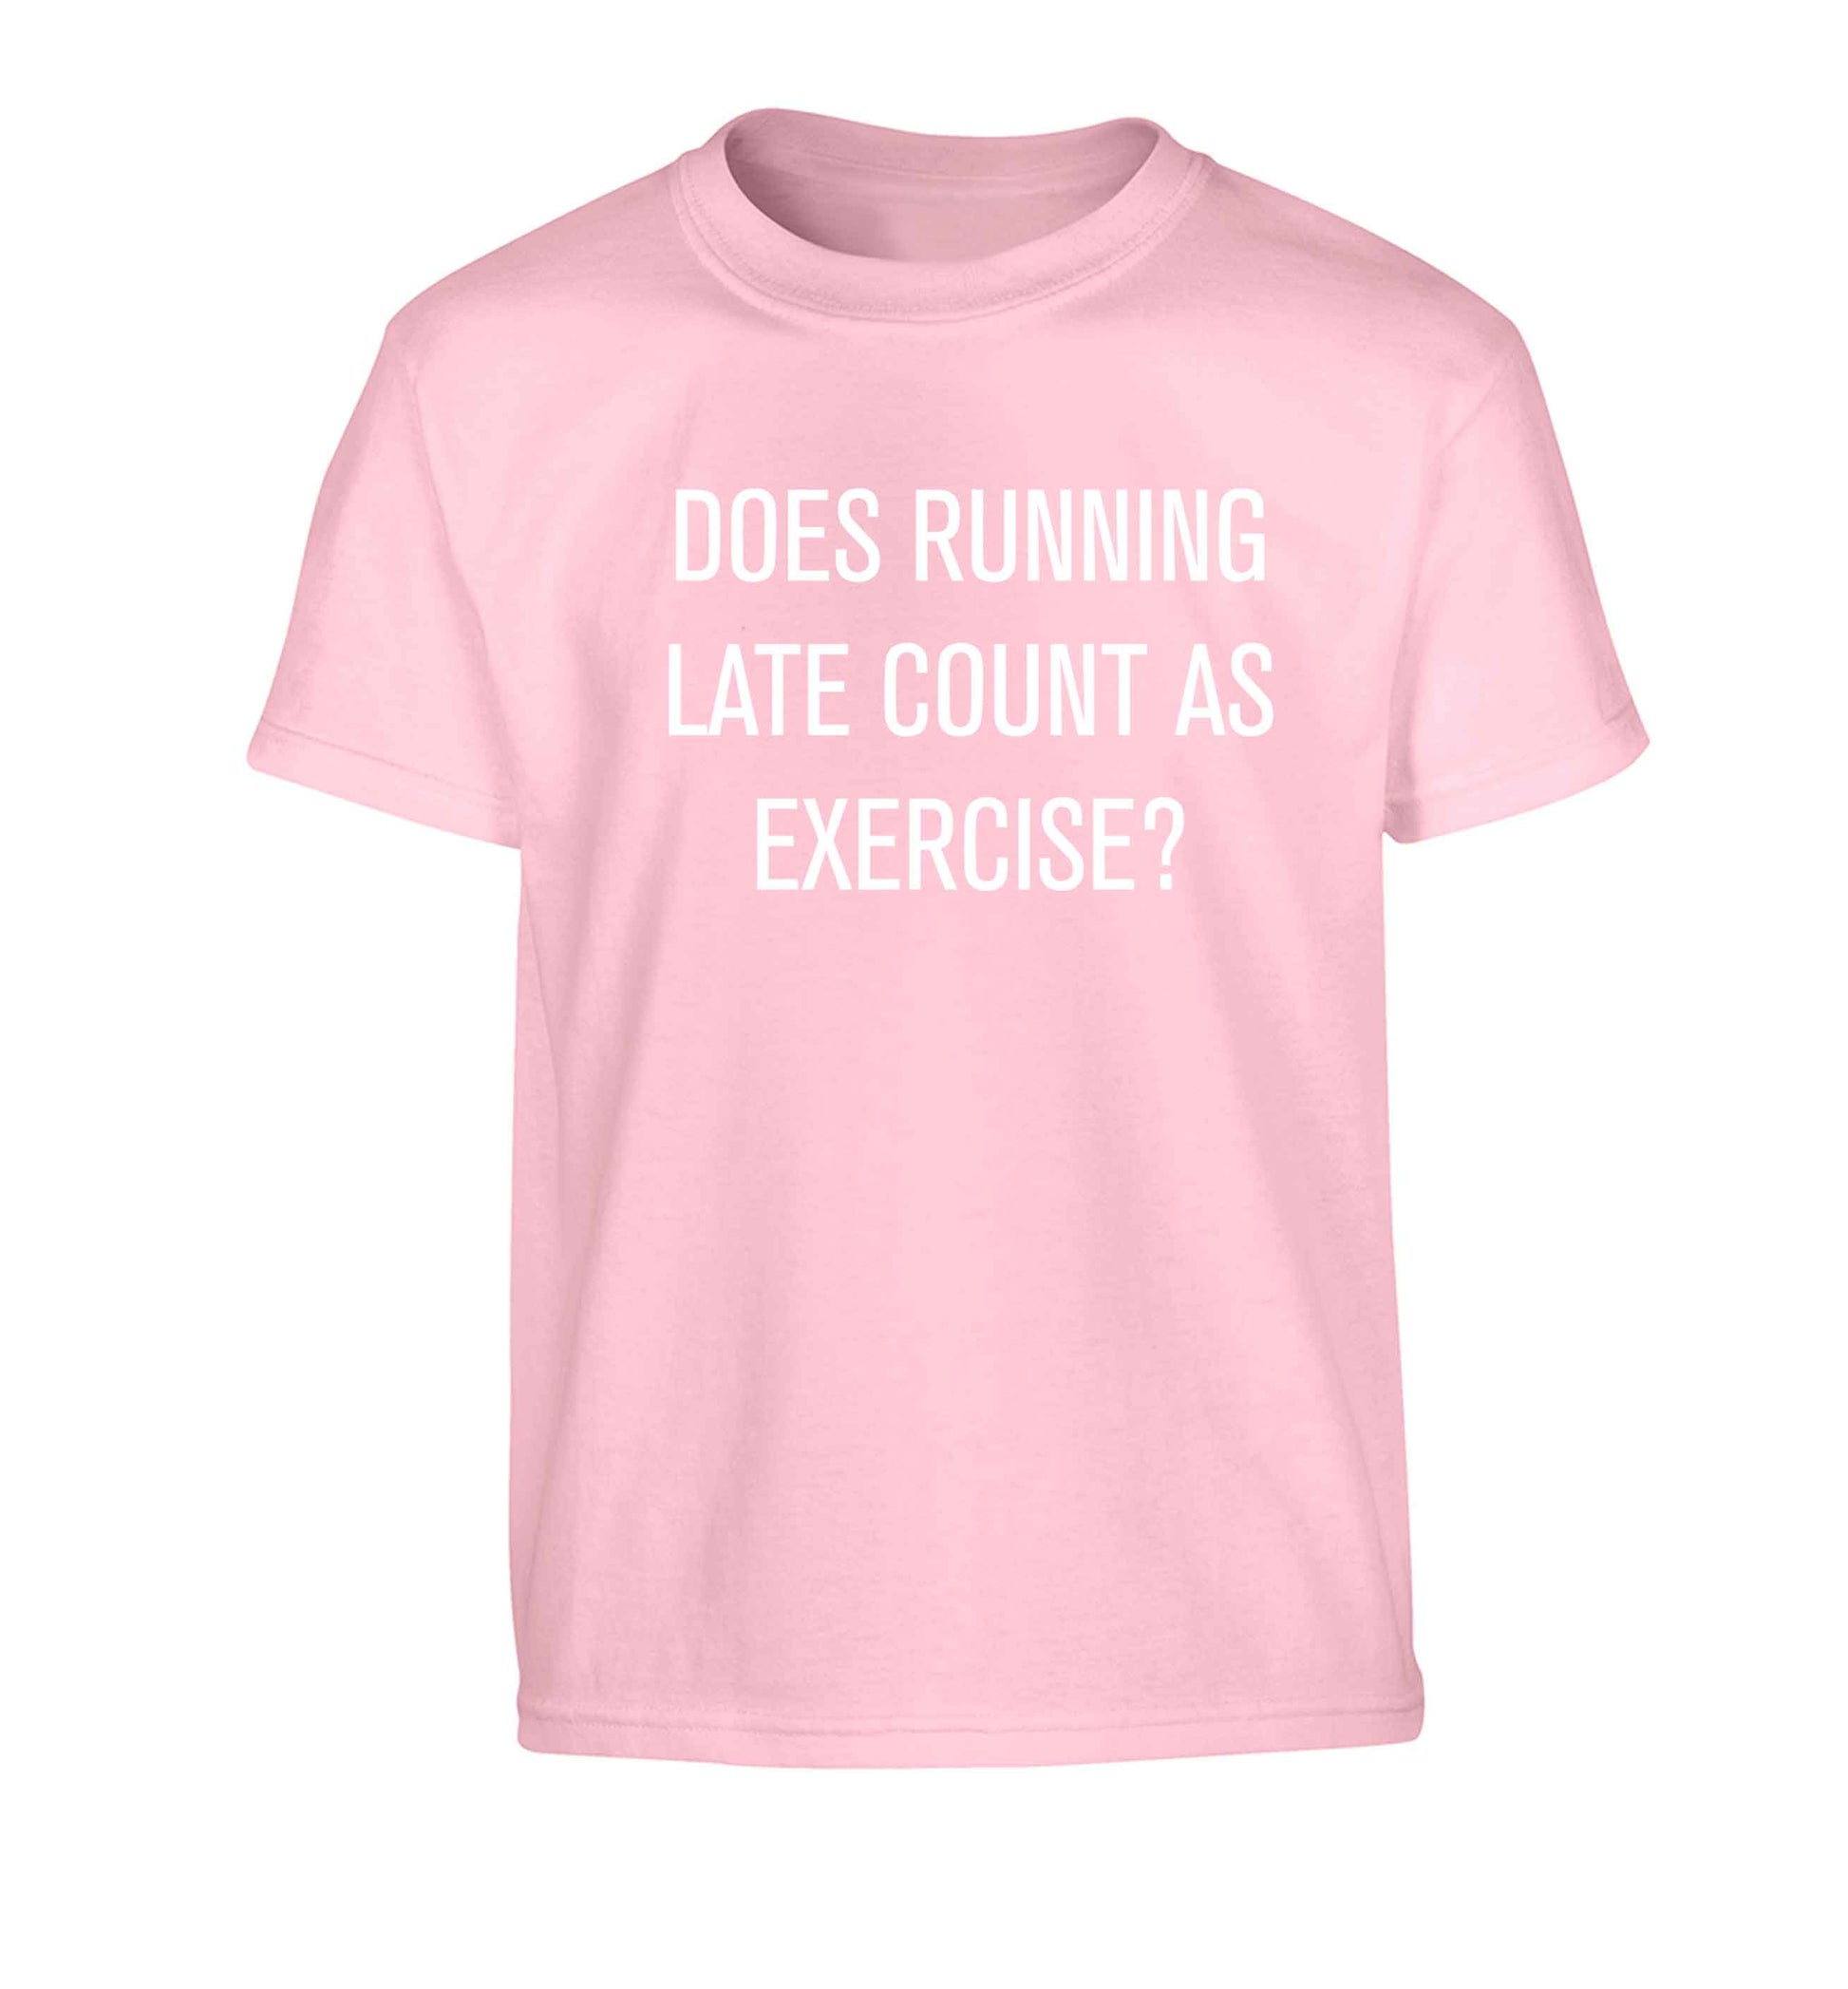 Does running late count as exercise? Children's light pink Tshirt 12-13 Years